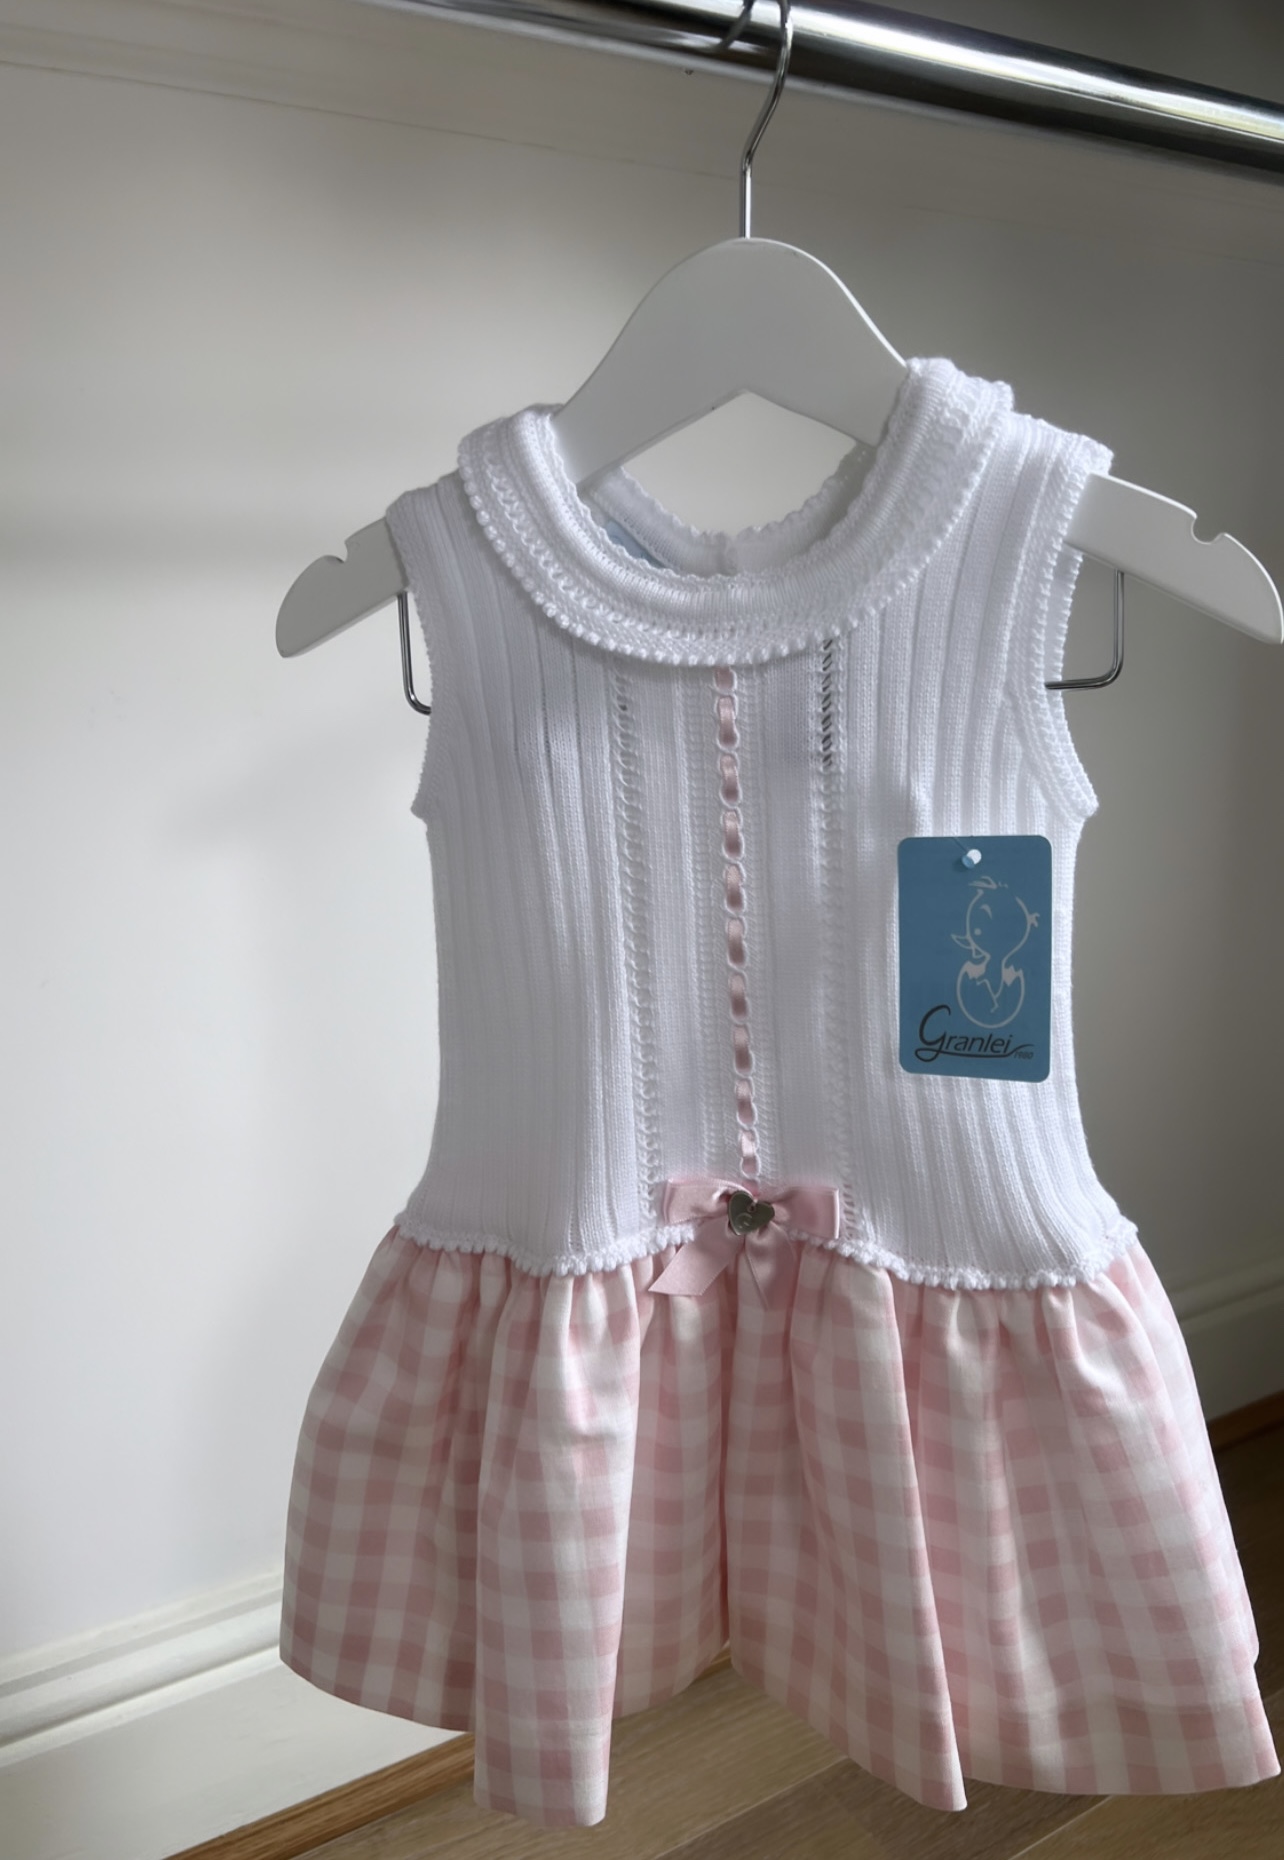 Granlei Little Cubs Exclusive White & Pink Gingham Dress